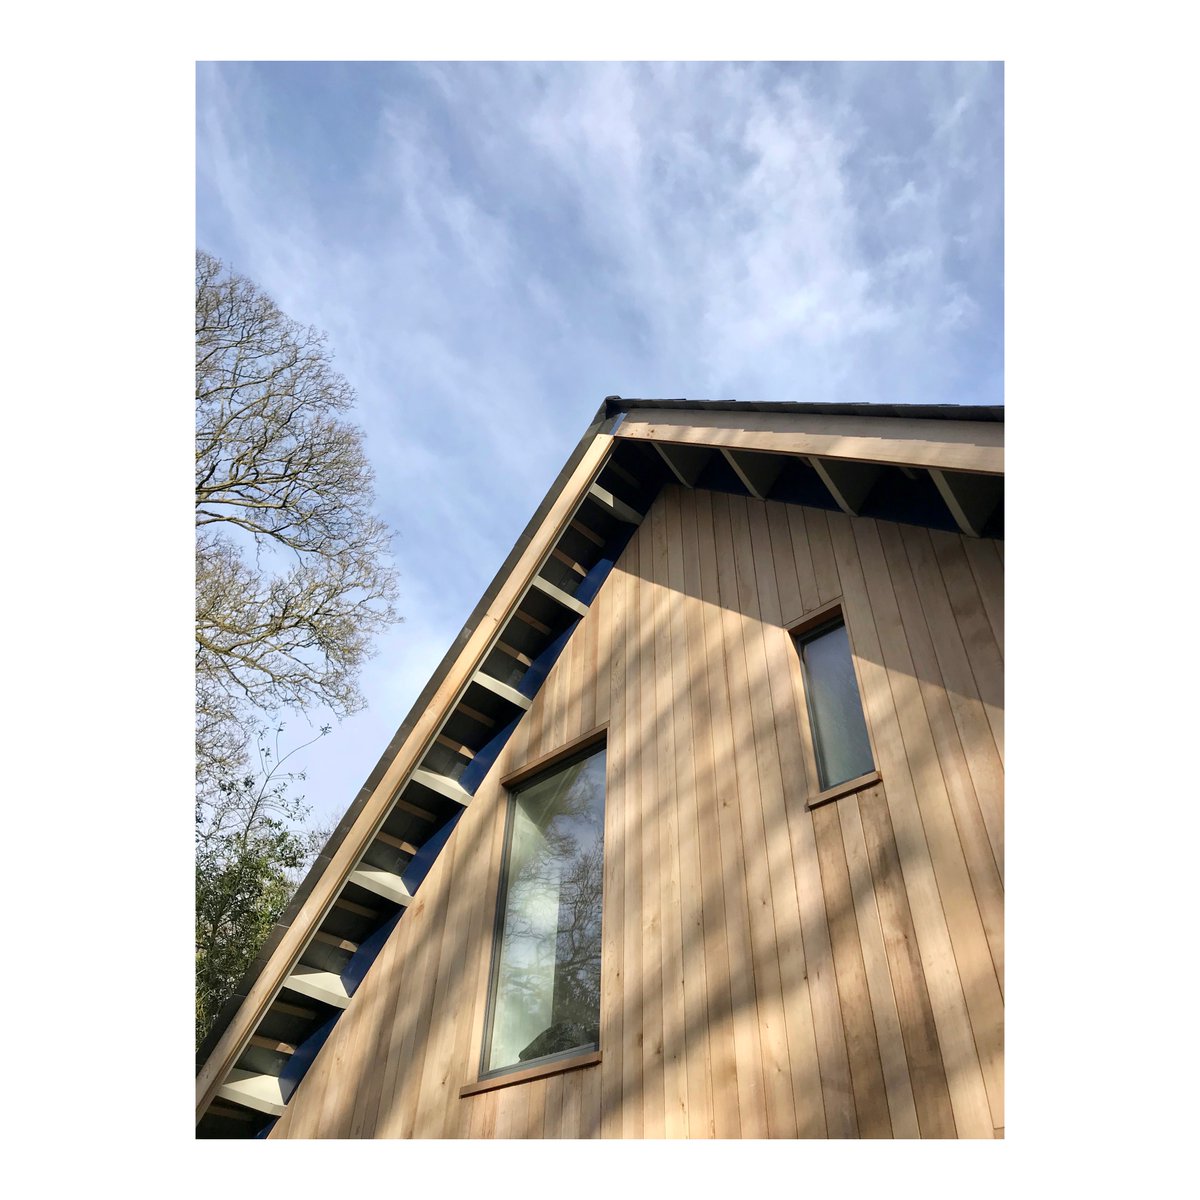 Spring light and sharp shadows compliment the intricate set out of exposed slate roof structure. #knoxbhavan #construction #newhouse #hertford #workinprogress #grove #springlight #roofstructure